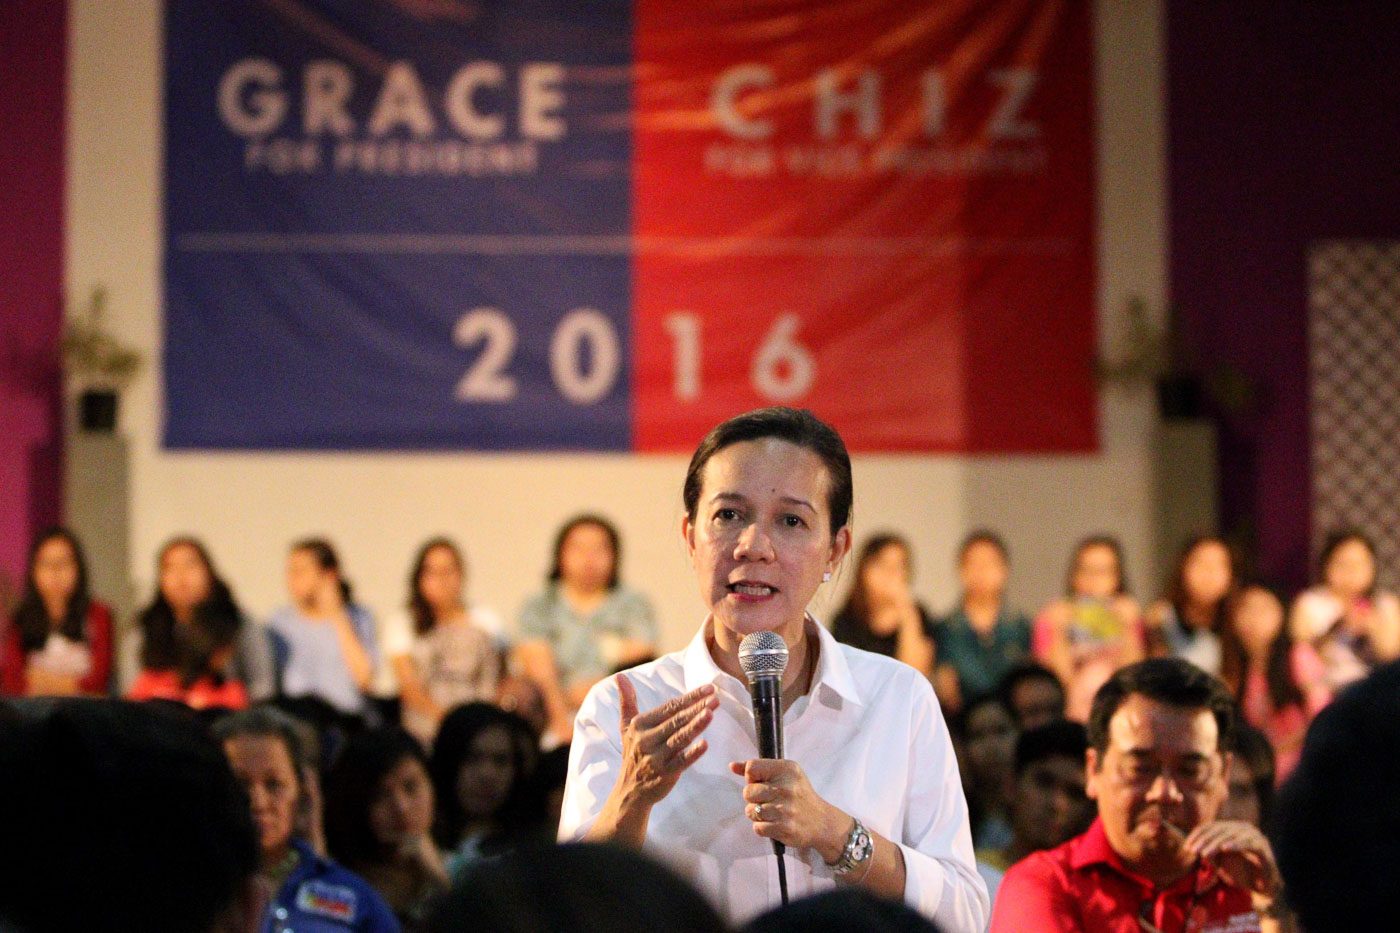 MOVING FORWARD. On March 14, 2016, nearly a week after the Supreme Court allows her to run for president, Grace Poe campaigns at the University of the Philippines-Visayas in Iloilo, the province where she was abandoned as an infant in front of a Catholic cathedral.  